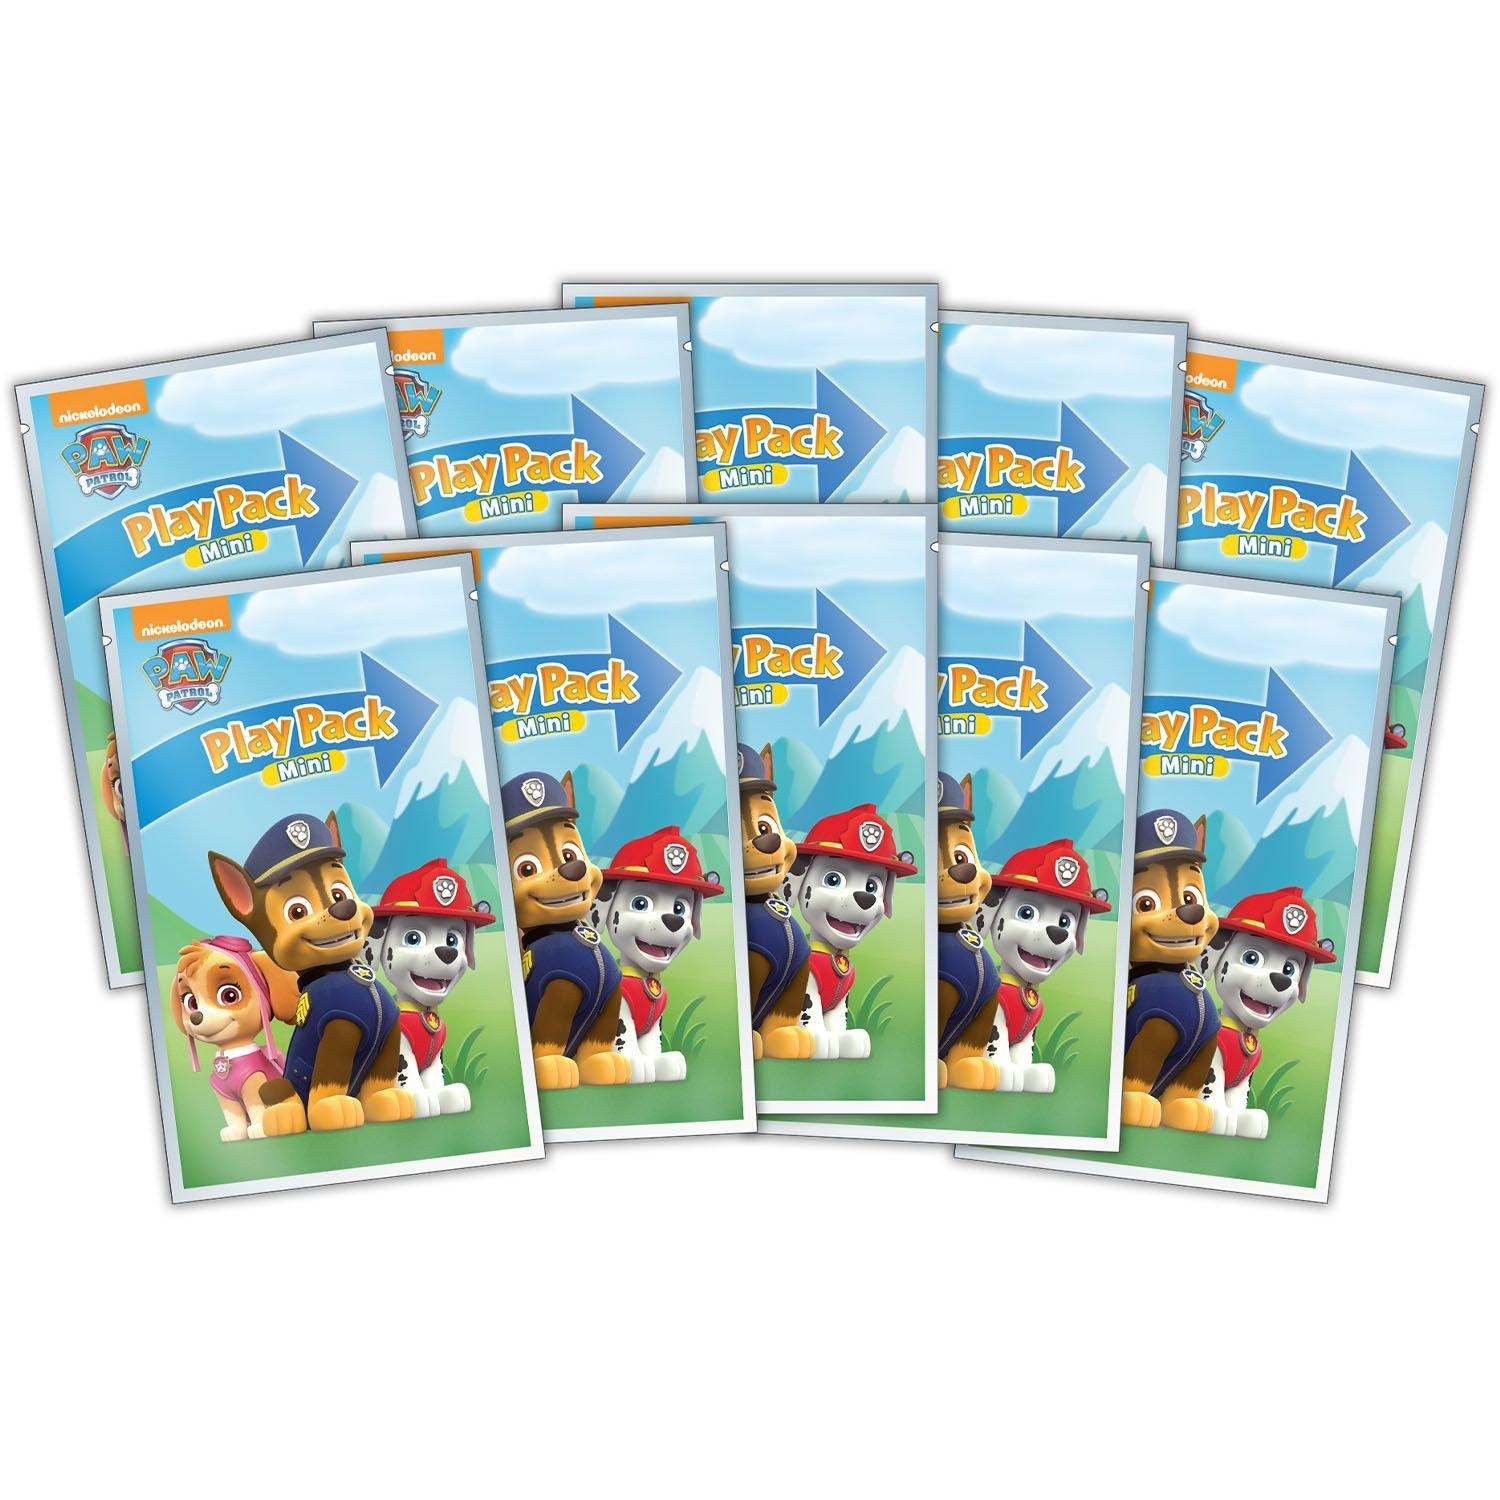 Paw Patrol Coloring Book Super Bundle Set - 2 Coloring and Activity Books, Over 50 Stickers and Mini Crayons